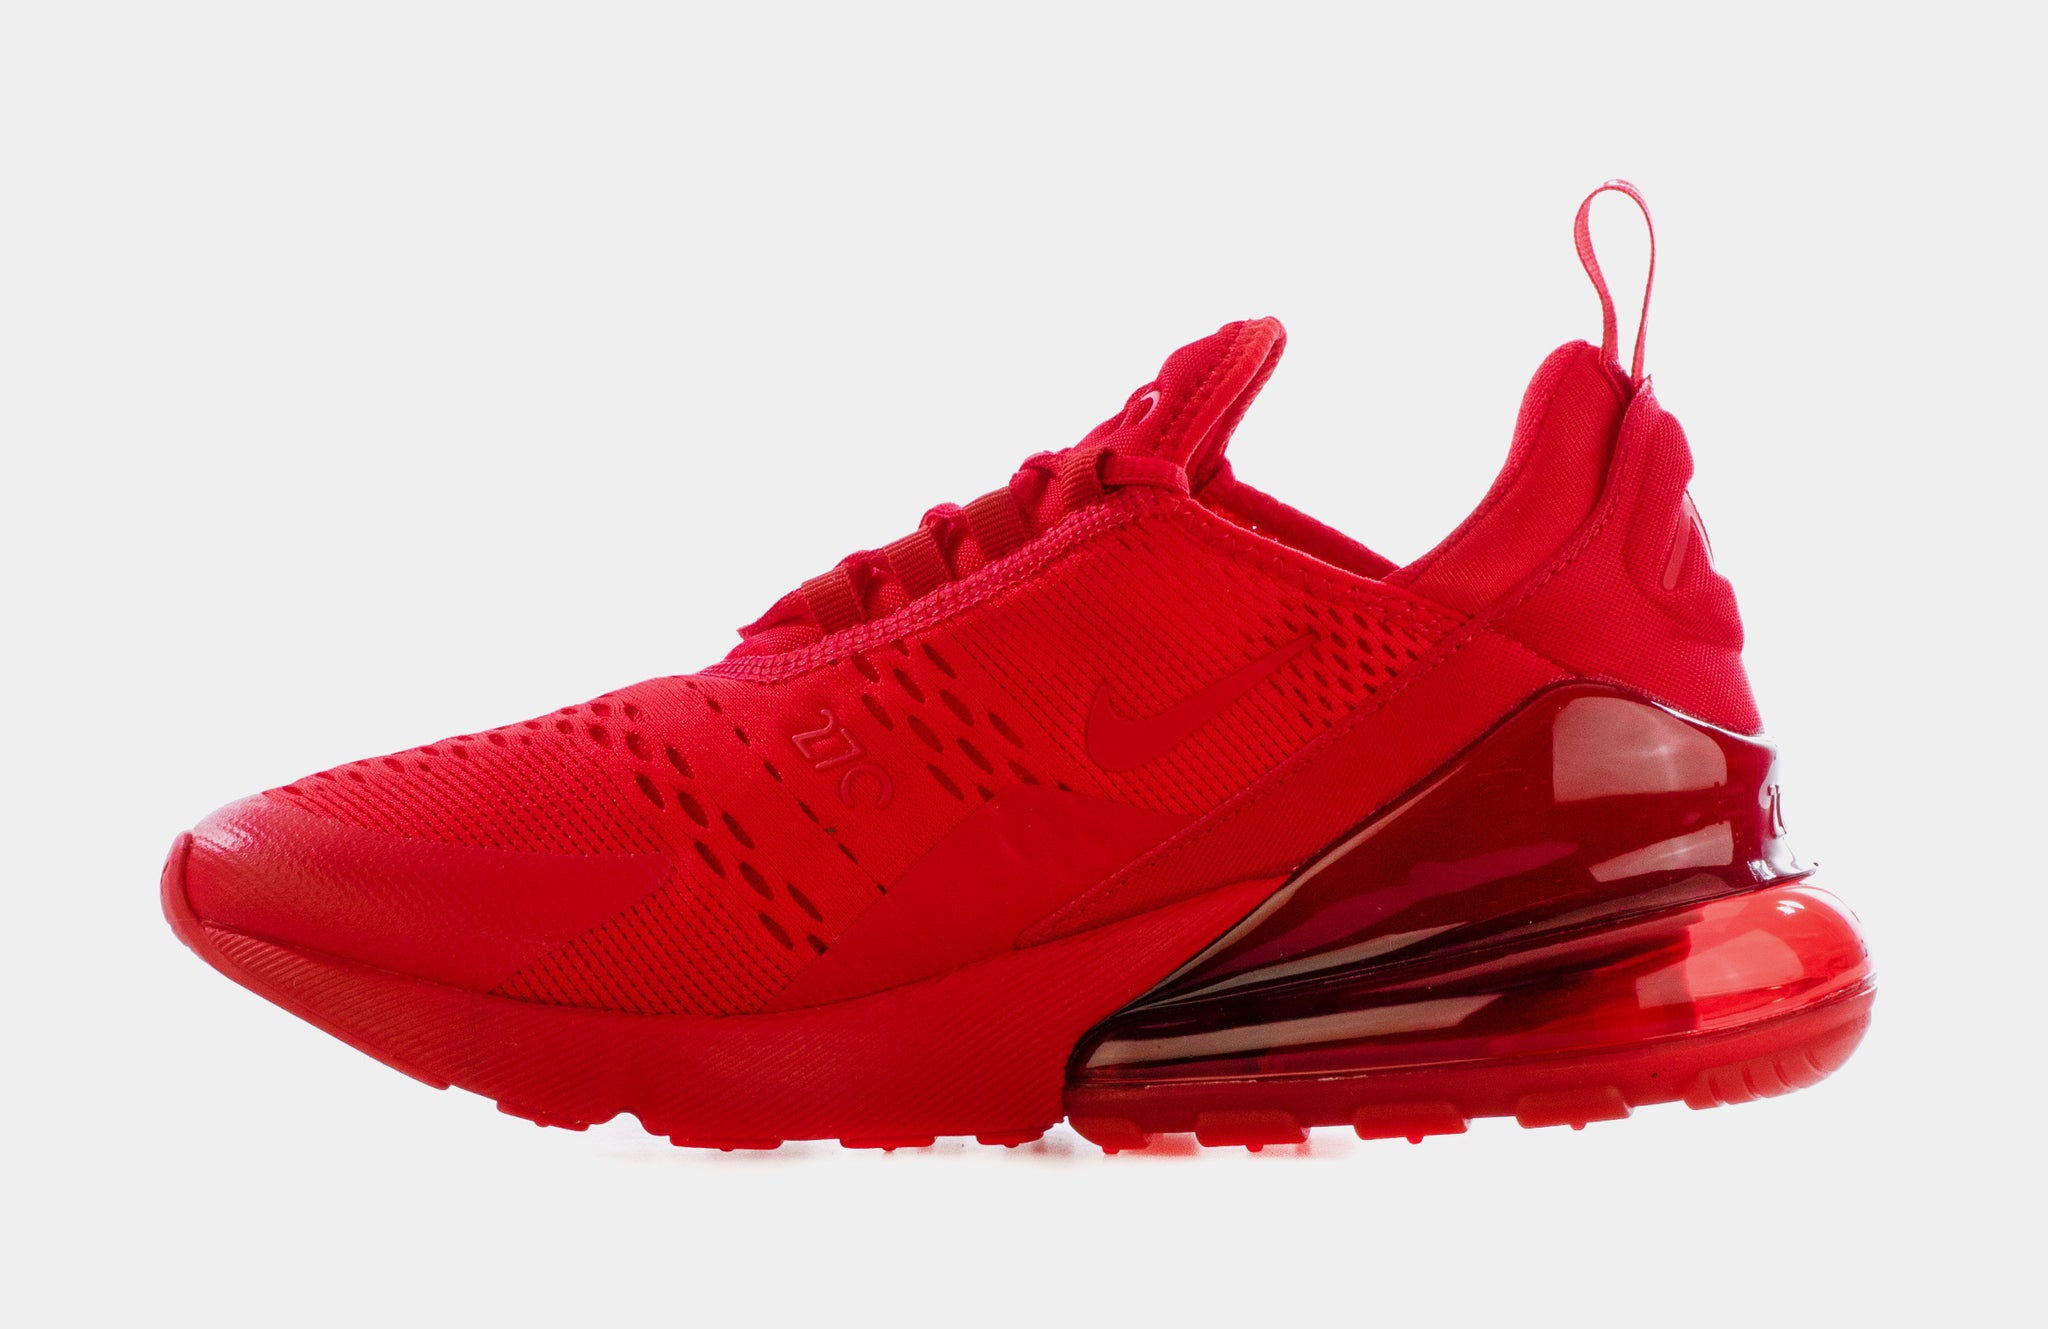 Size+13+-+Nike+Air+Max+270+Habanero+Red+2018 for sale online